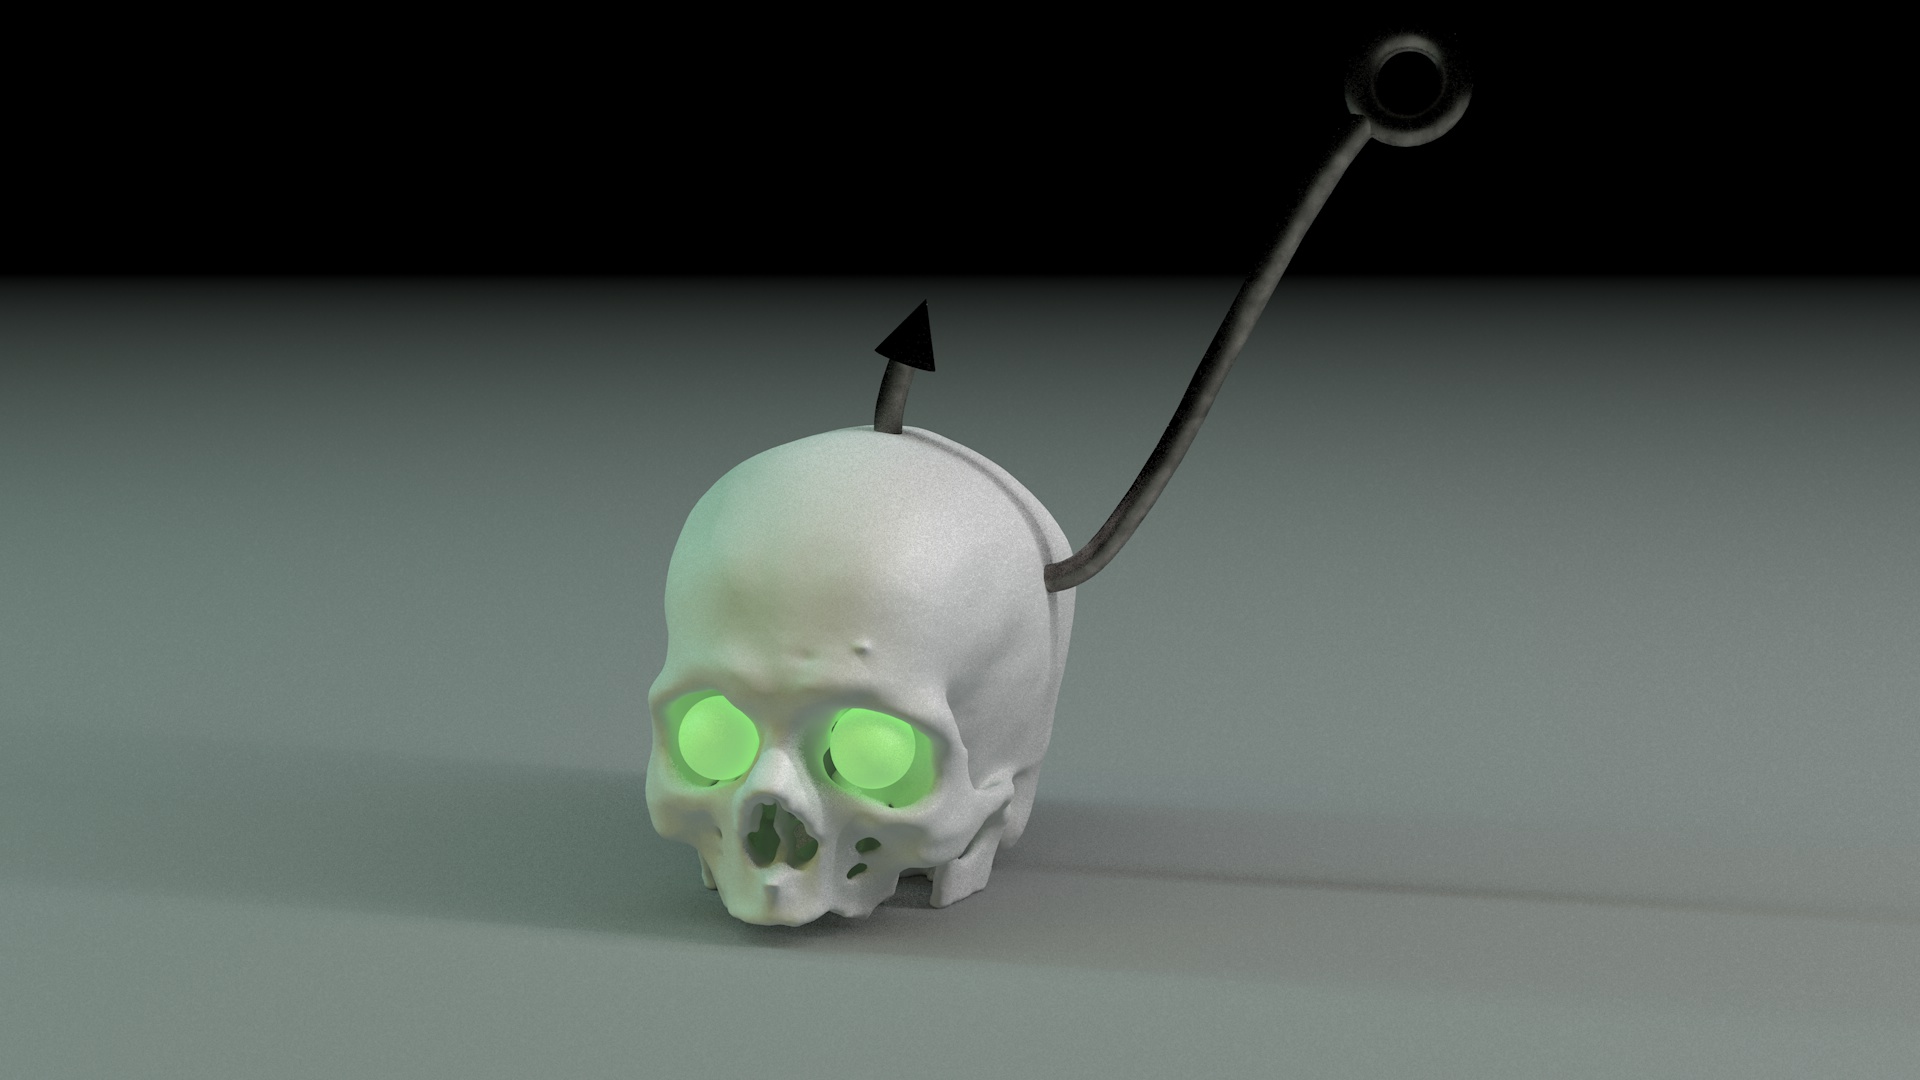 Halloween Skull With Meat Hook and Glow-In-The-Dark Eyes by